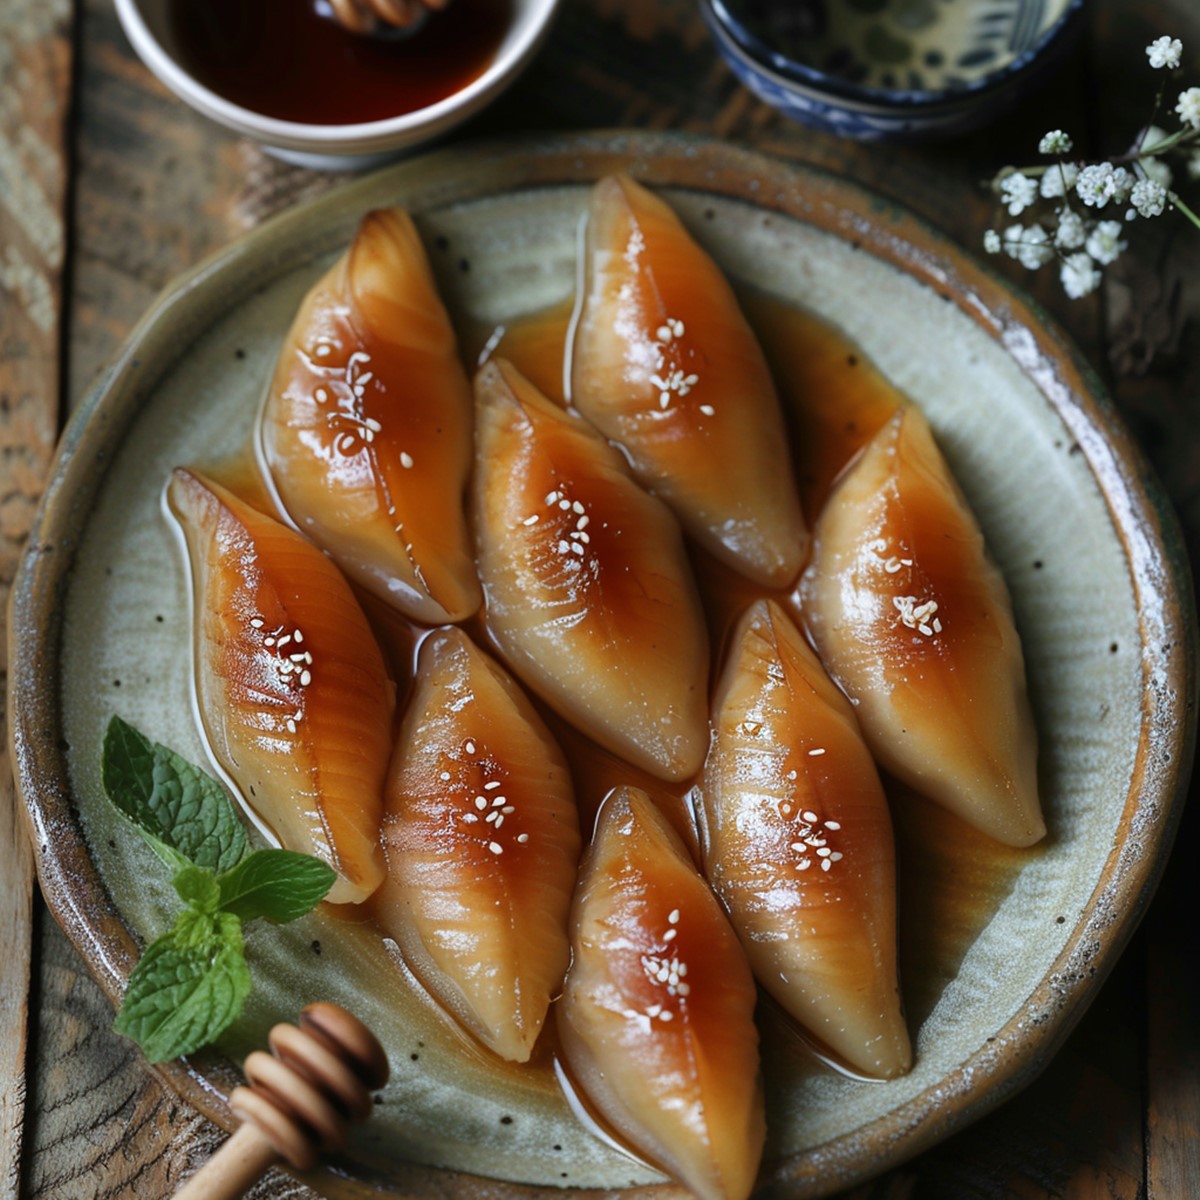 Traditional Newari Yomari dumplings with chaku filling, garnished with sesame seeds, served with honey on a rustic wooden table.